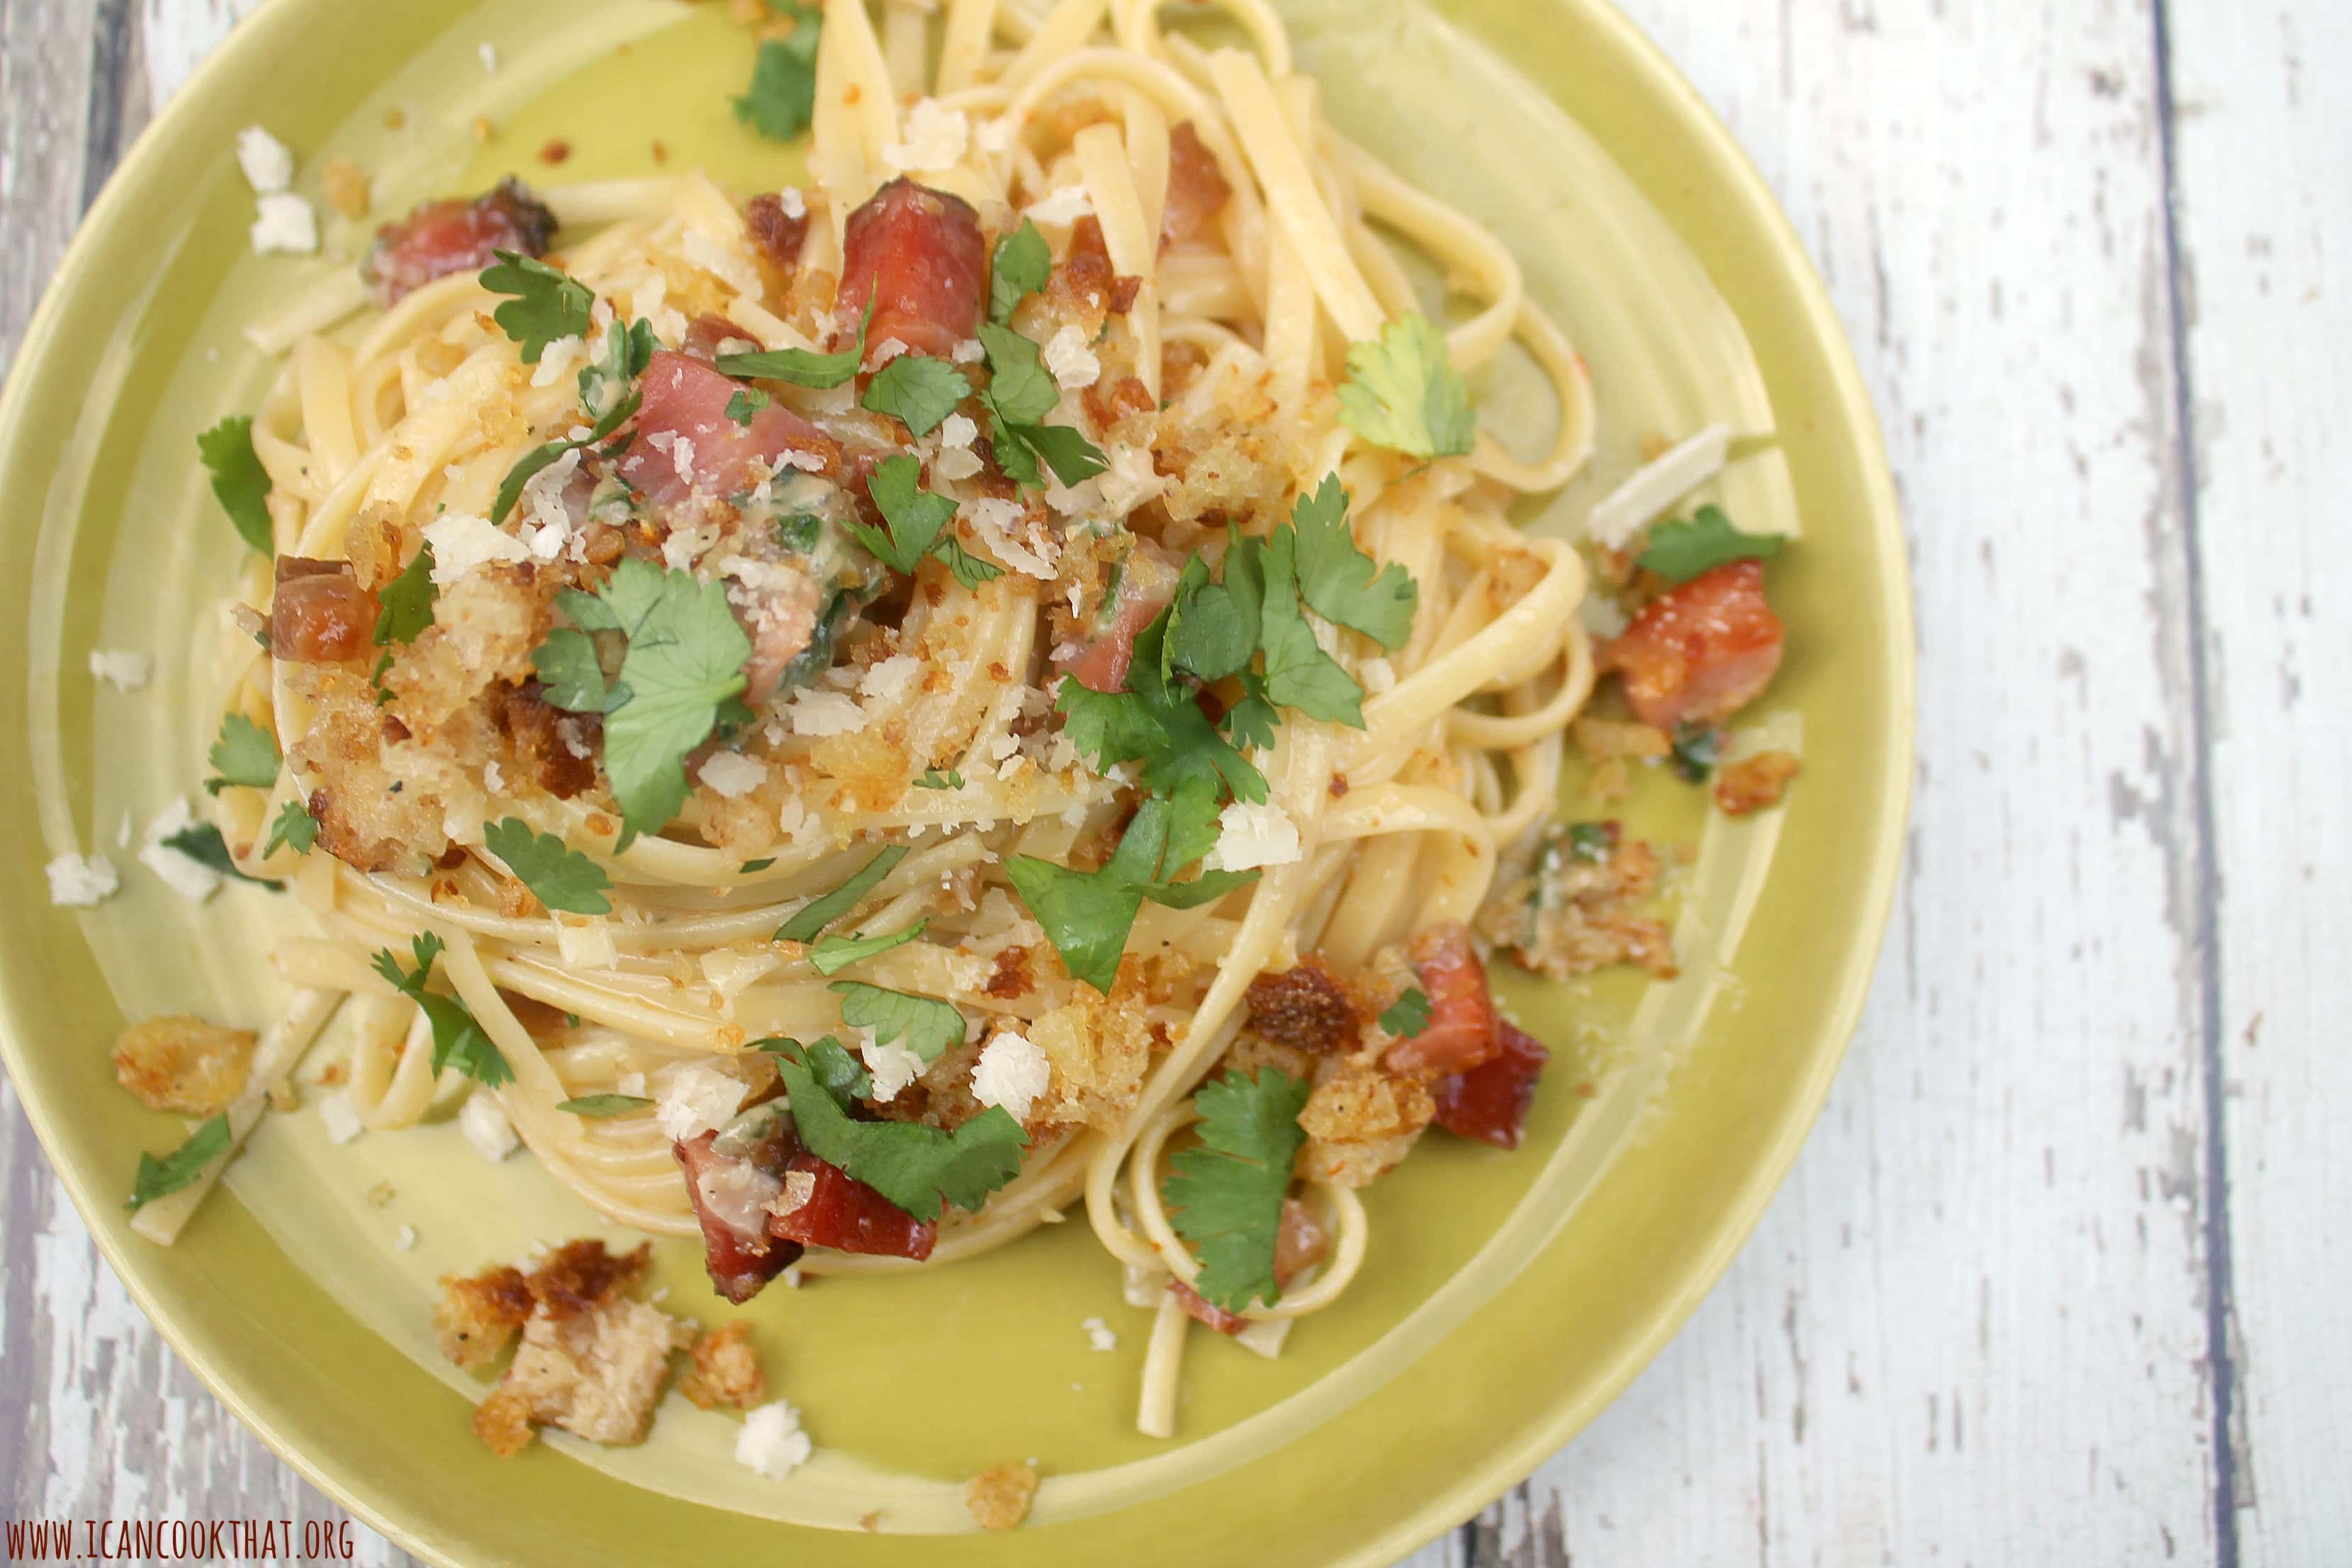 Speck and Anchovy Pasta with Garlic Breadcrumbs